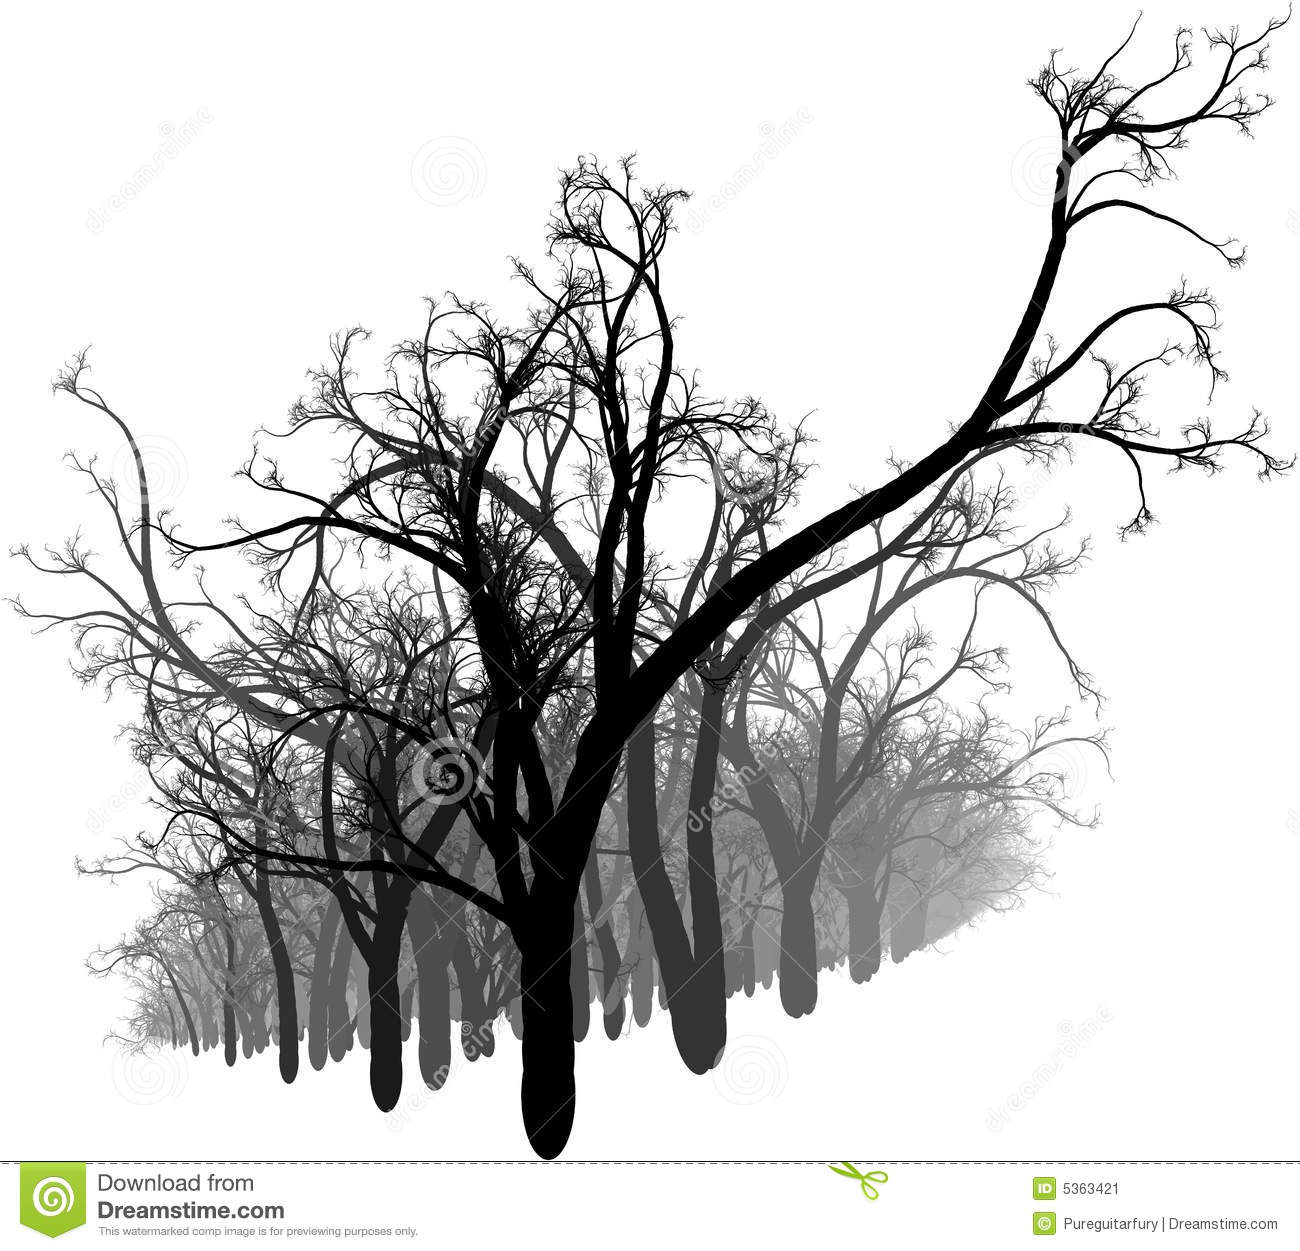 Composition Of A Black And White Forest In The Middle Of Winter